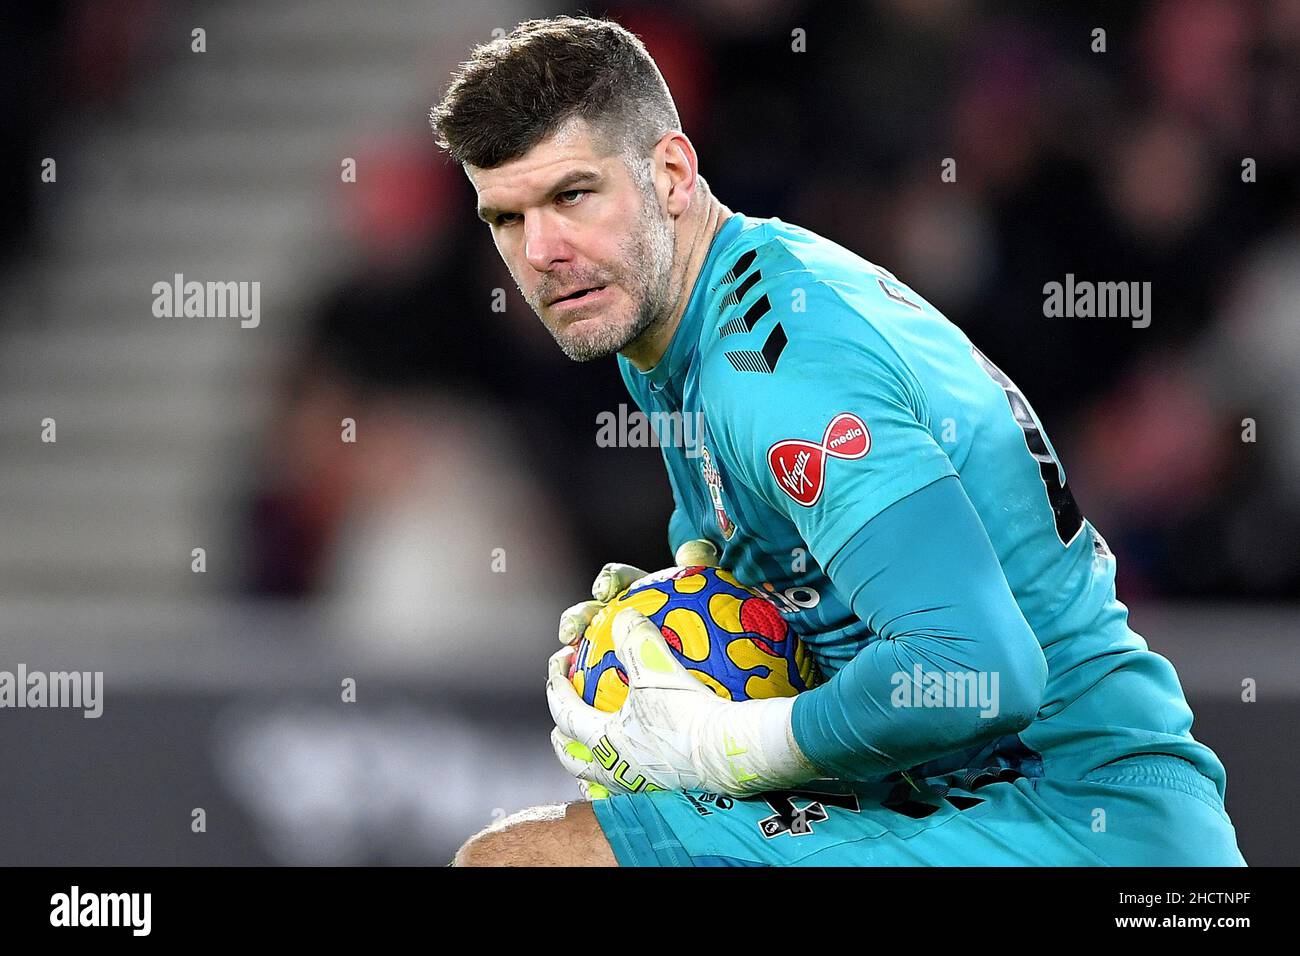 Fraser Forster of Southampton - Southampton v Tottenham Hotspur, Premier League, St Mary's Stadium, Southampton, UK - 28h December 2021  Editorial Use Only - DataCo restrictions apply Stock Photo